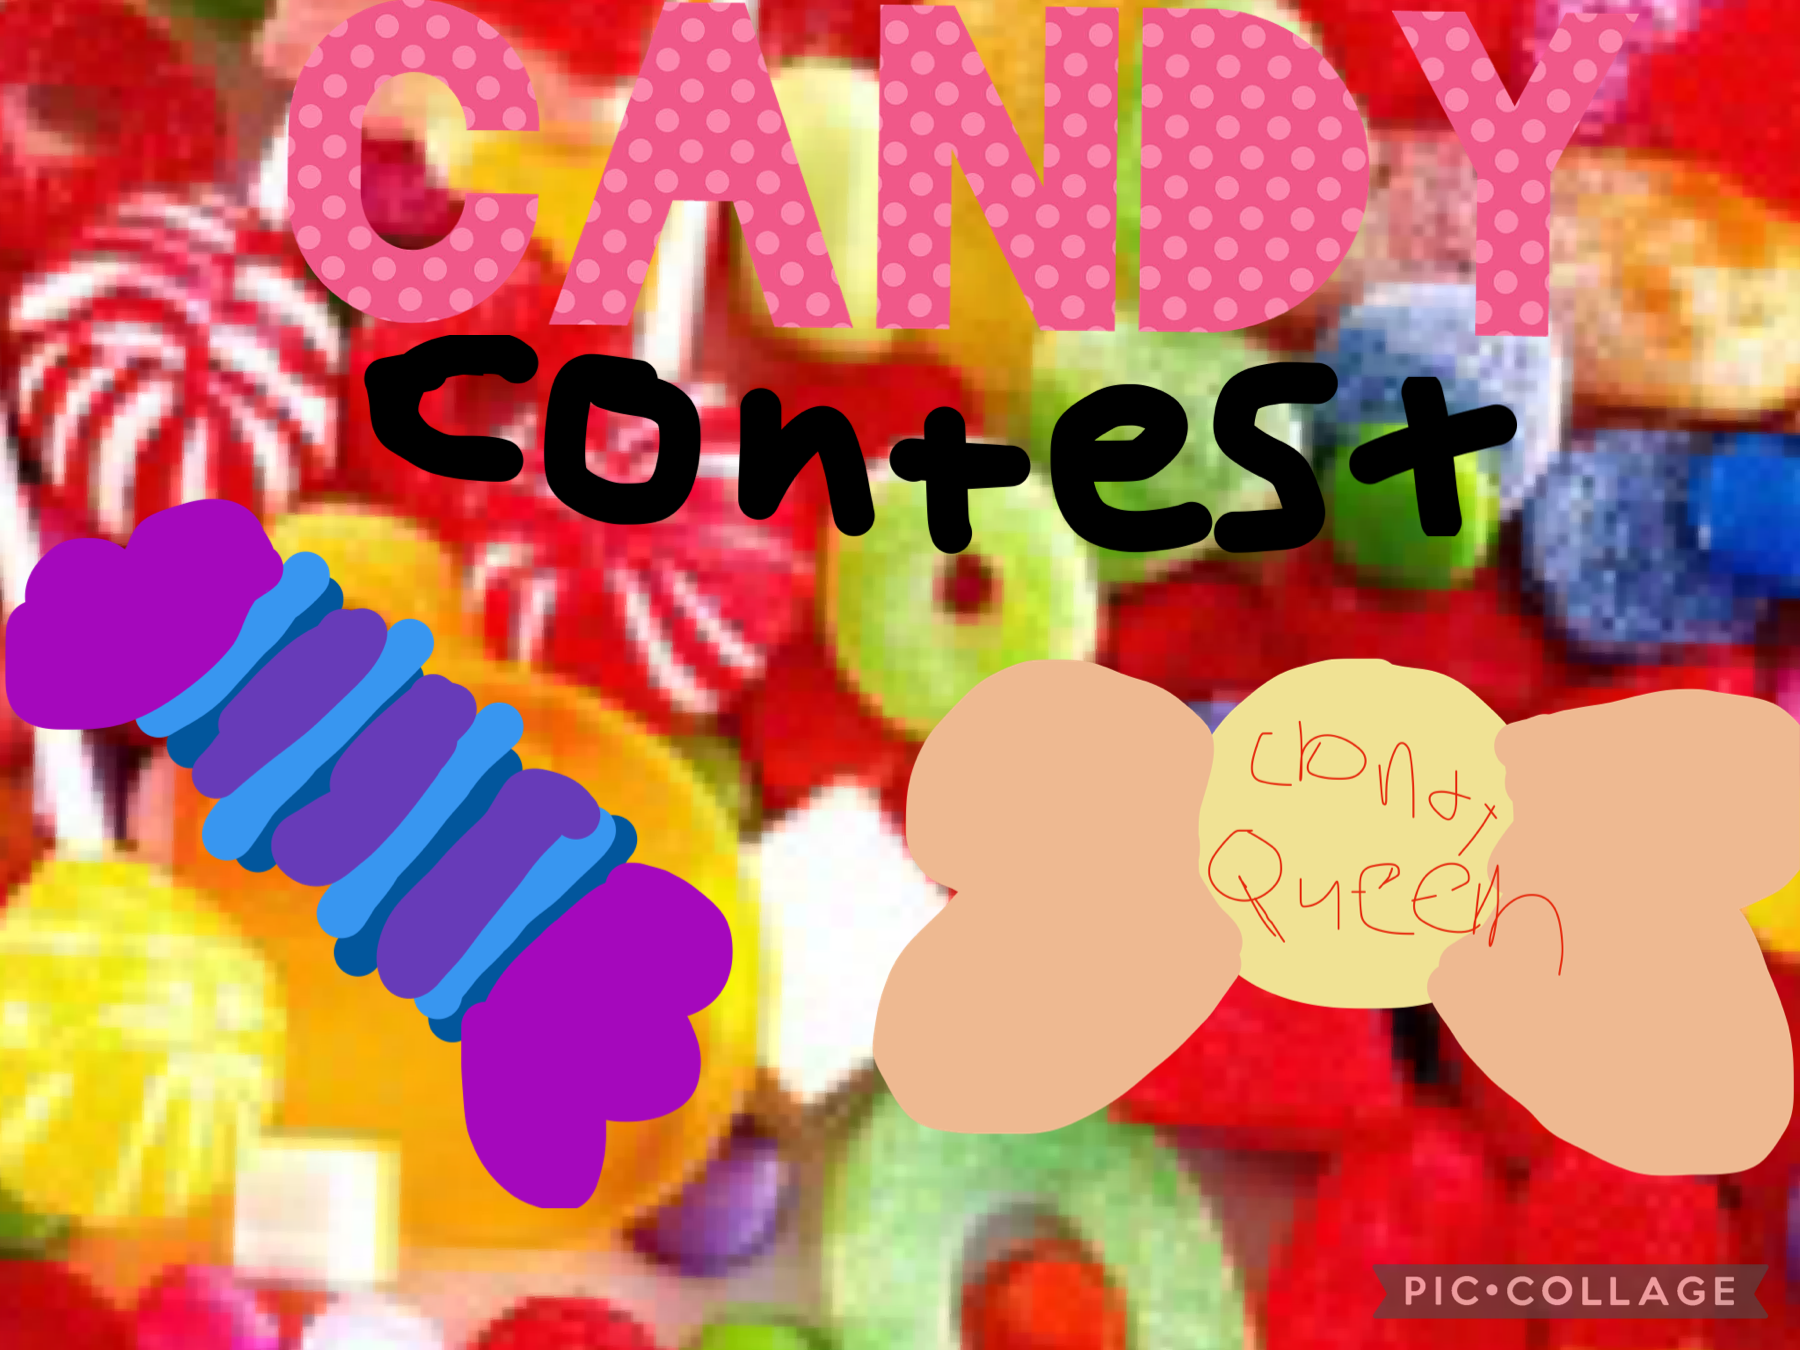 This is a candy contest I joined thanks to my follower who asked me